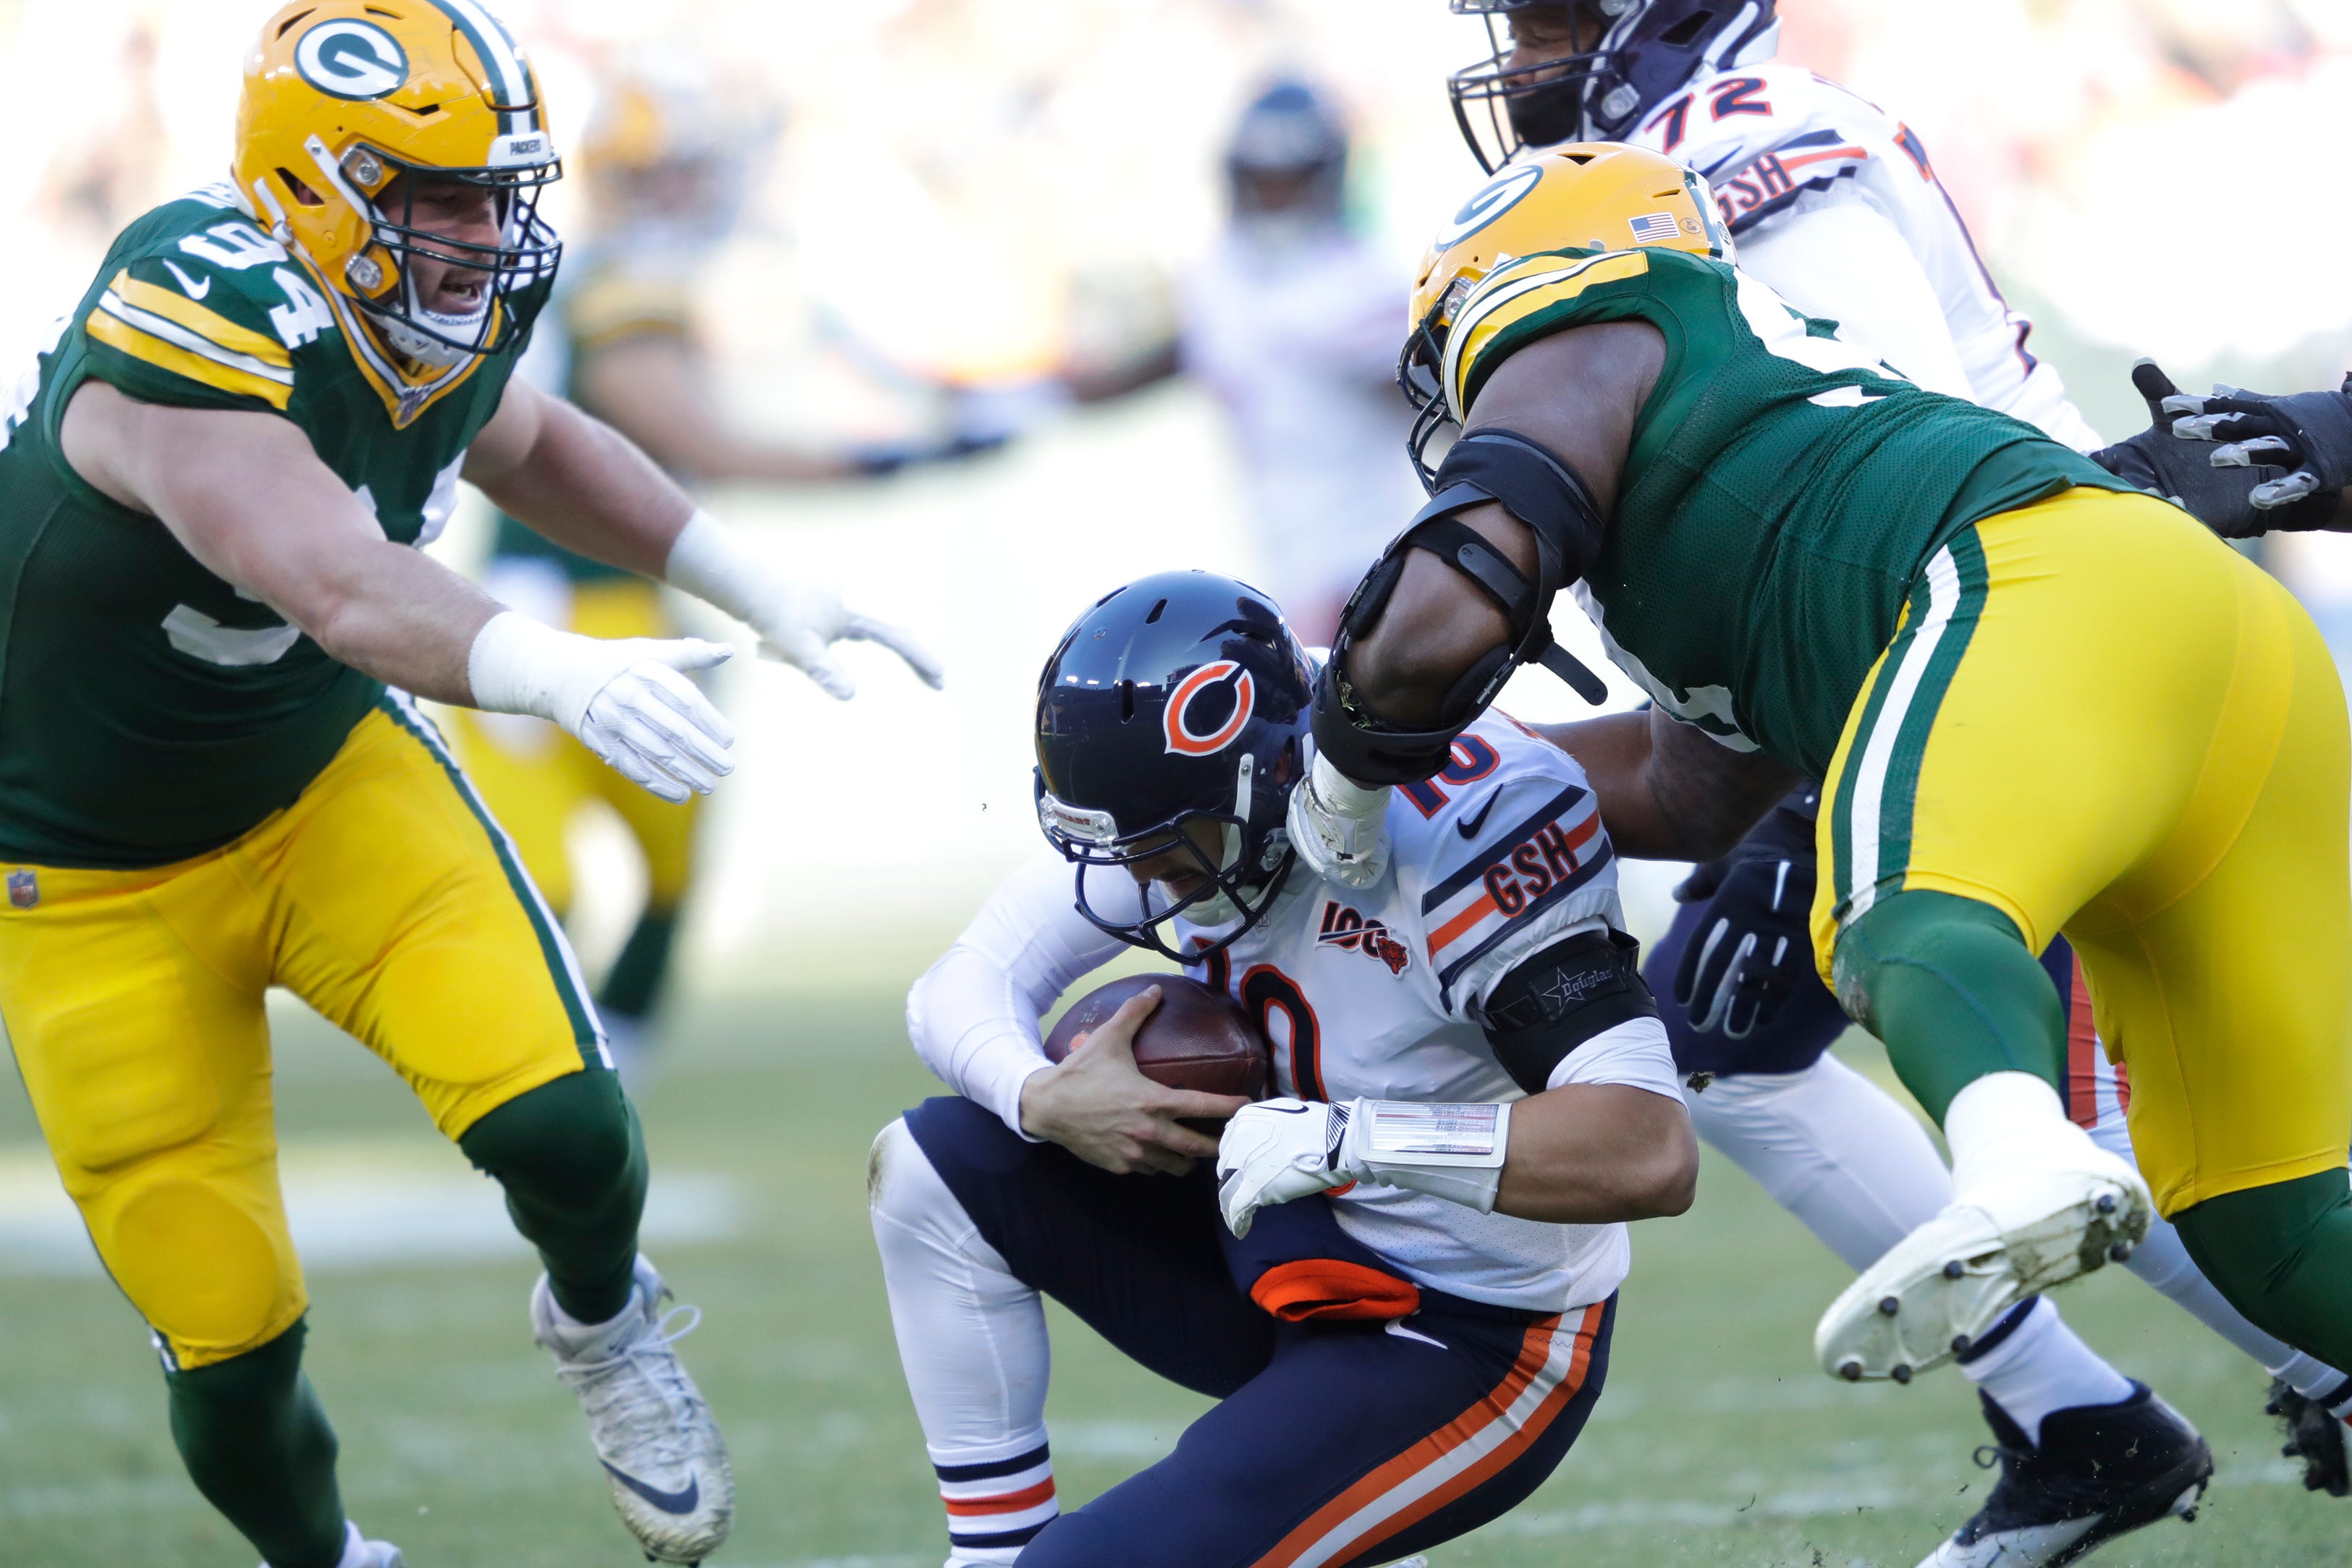 Chicago Bears quarterback Mitchell Trubisky (10) is sacked by Green Bay Packers nose tackle Kenny Clark (97) as Dean Lowry (94) moves in on the play Sunday, December 15, 2019, at Lambeau Field in Green Bay, Wis.